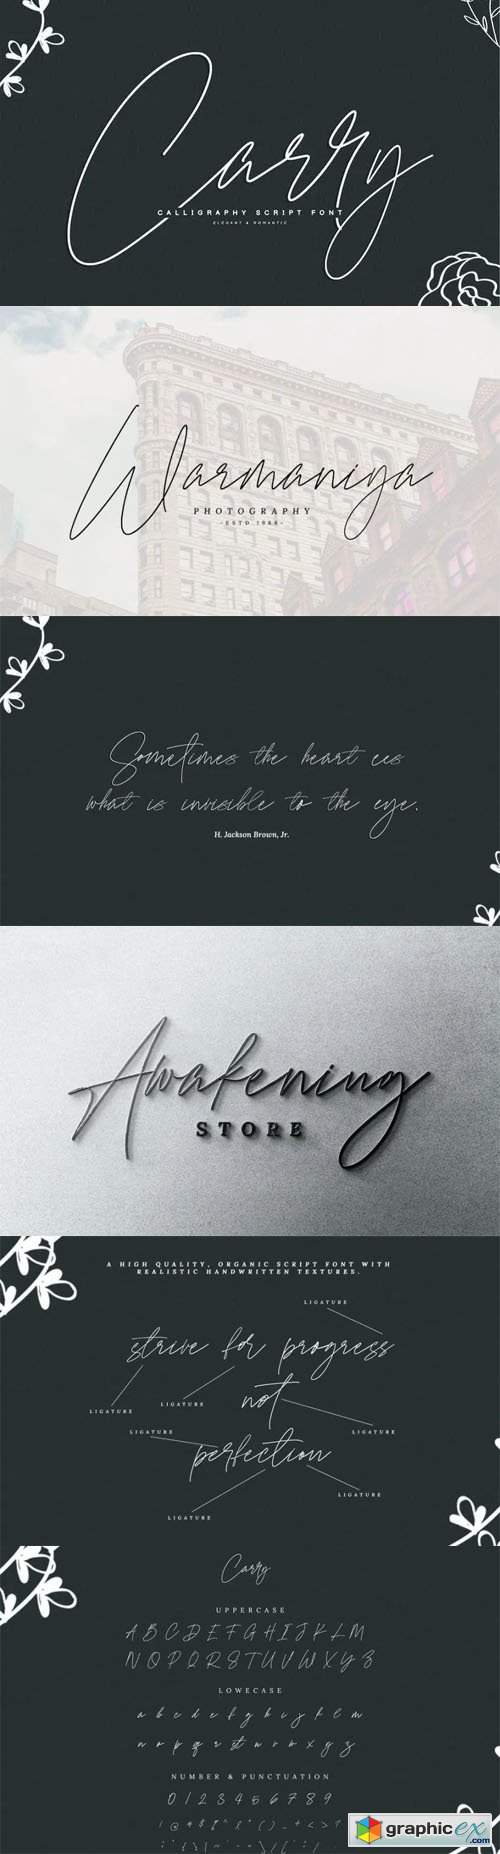  Carry - Calligraphy Script Font 